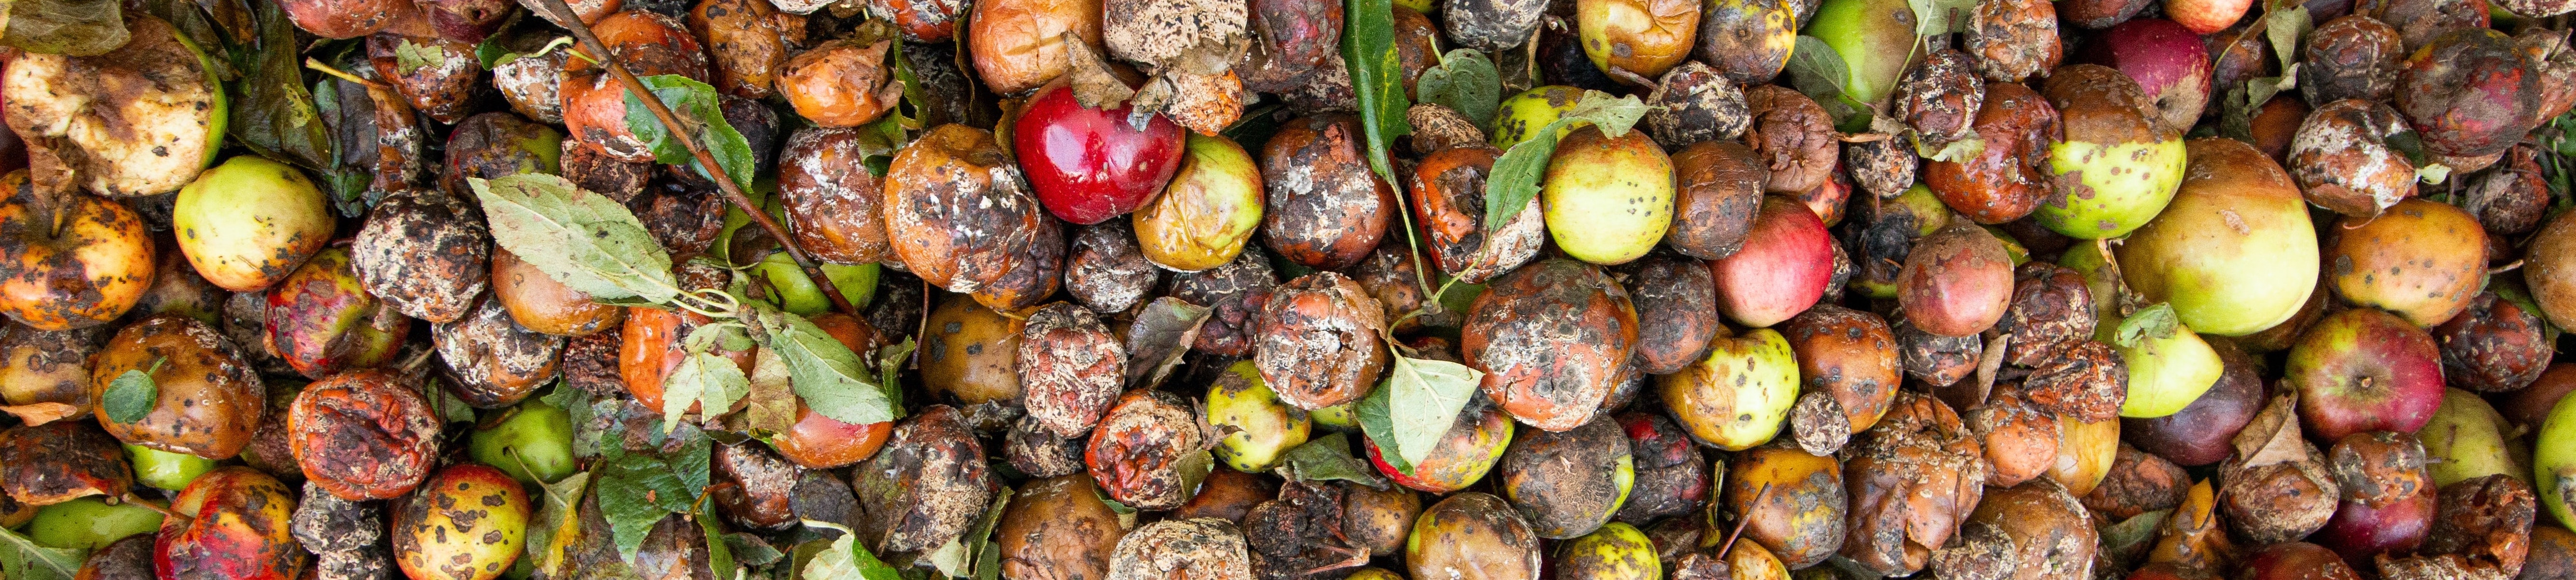 Food Waste - Exploring “Food Loss and Waste” Database from FAO